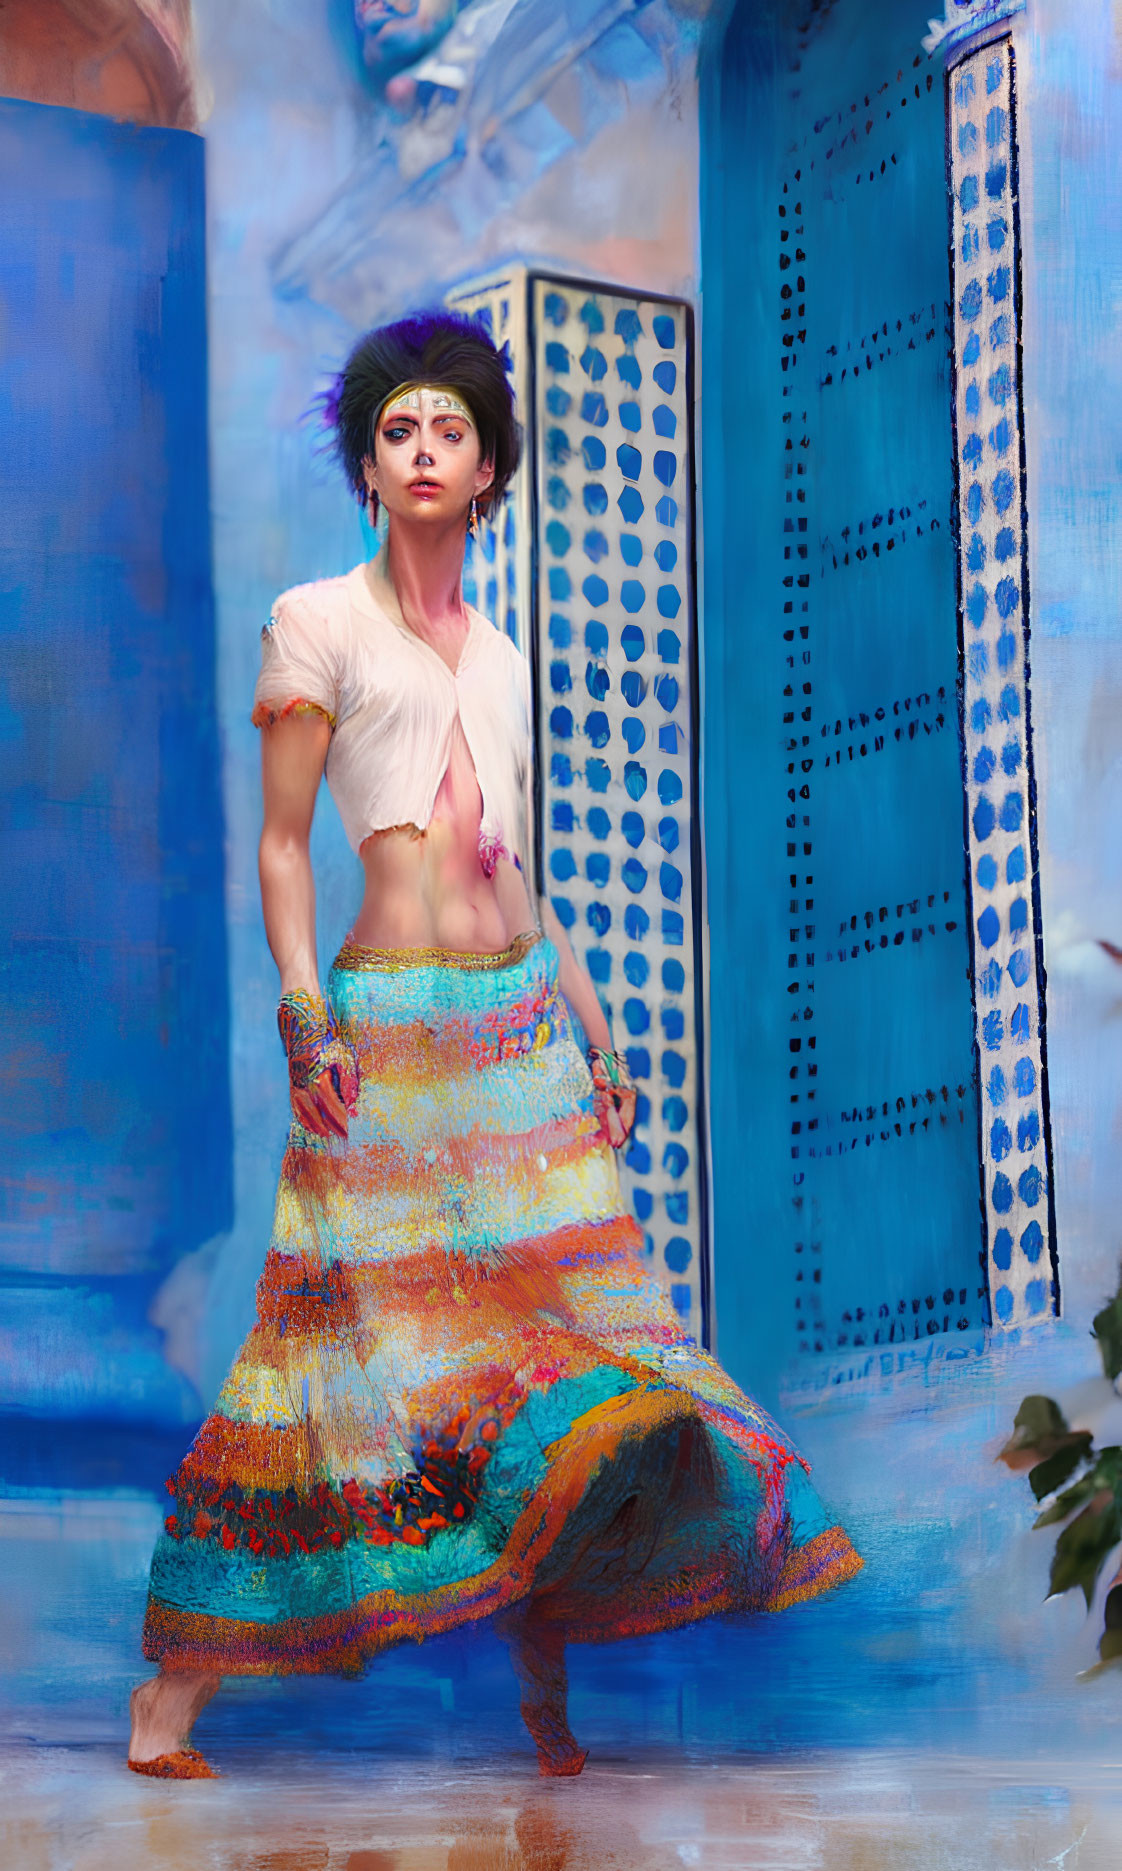 Bohemian-styled woman in colorful skirt and edgy haircut in ornate blue space